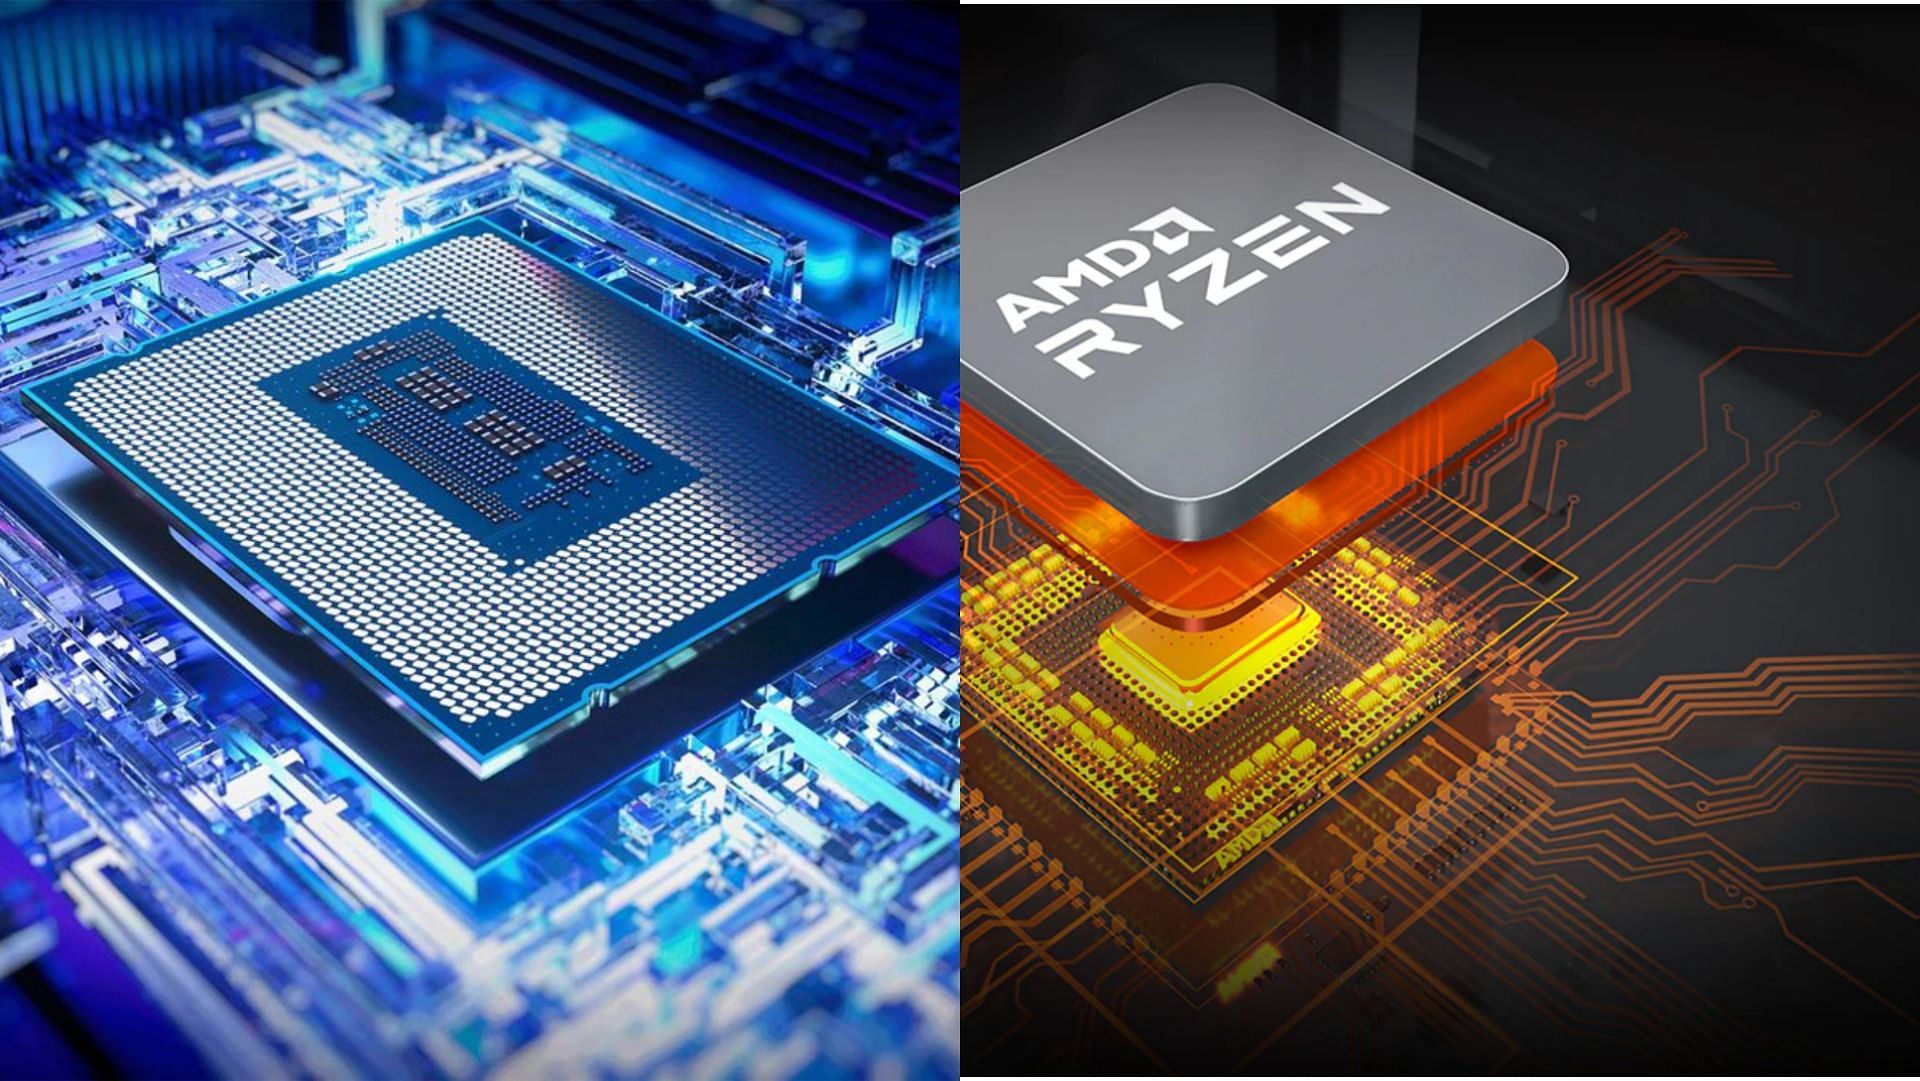 AMD and Intel have made some incredible high-end CPUs in 2022 (image by Intel and AMD)